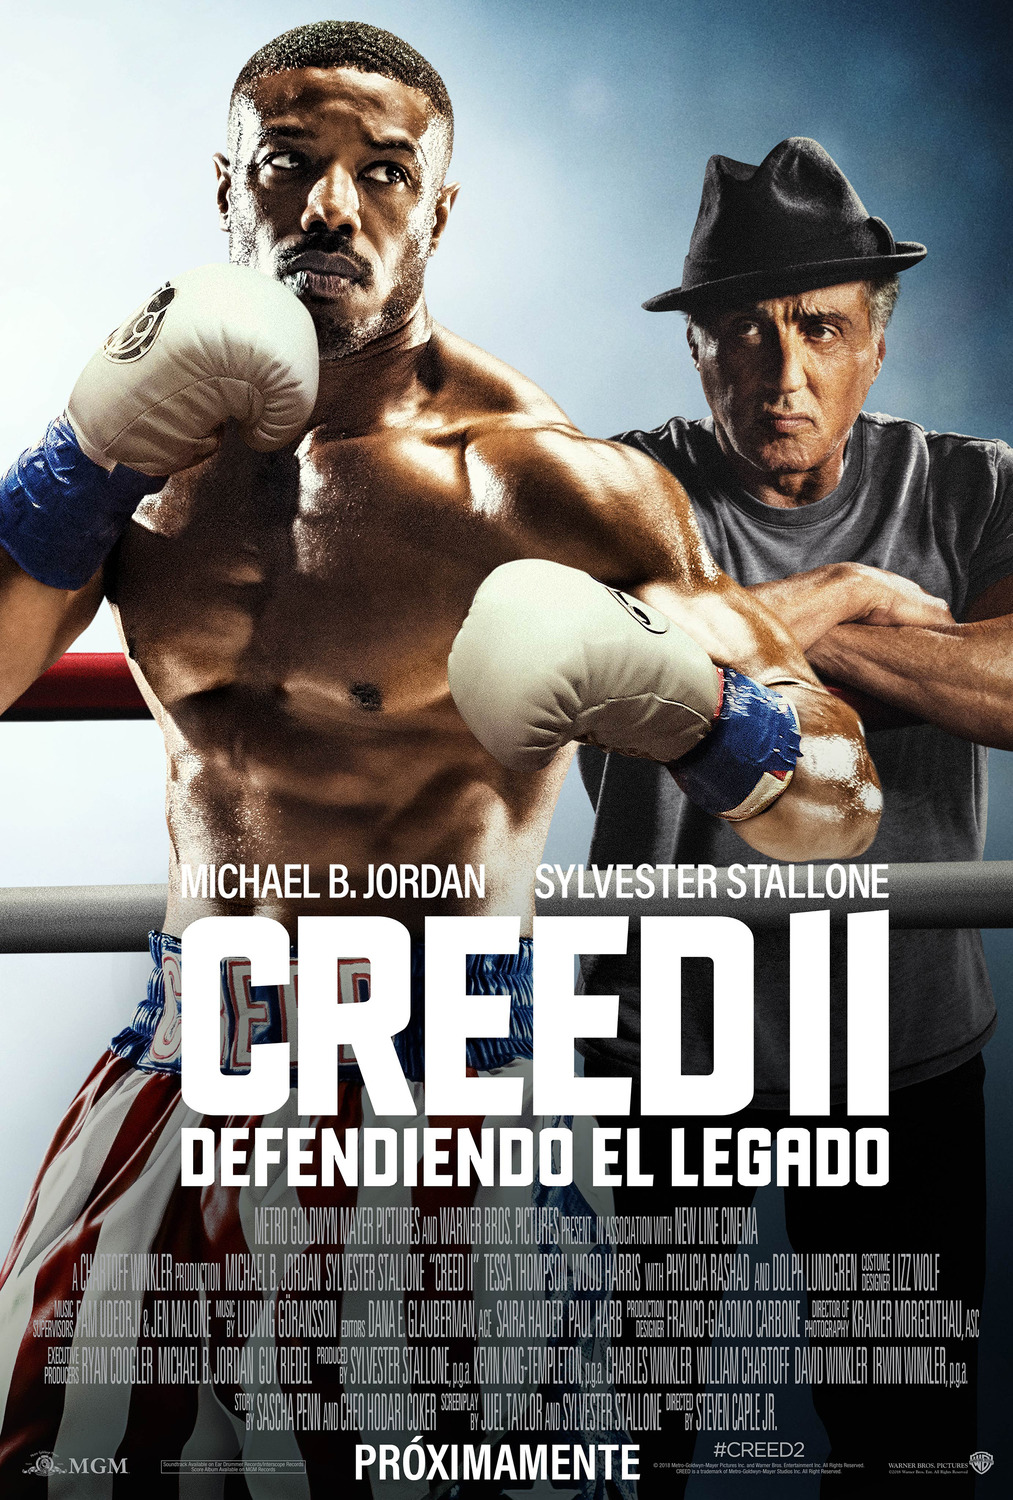 Extra Large Movie Poster Image for Creed II (#6 of 7)